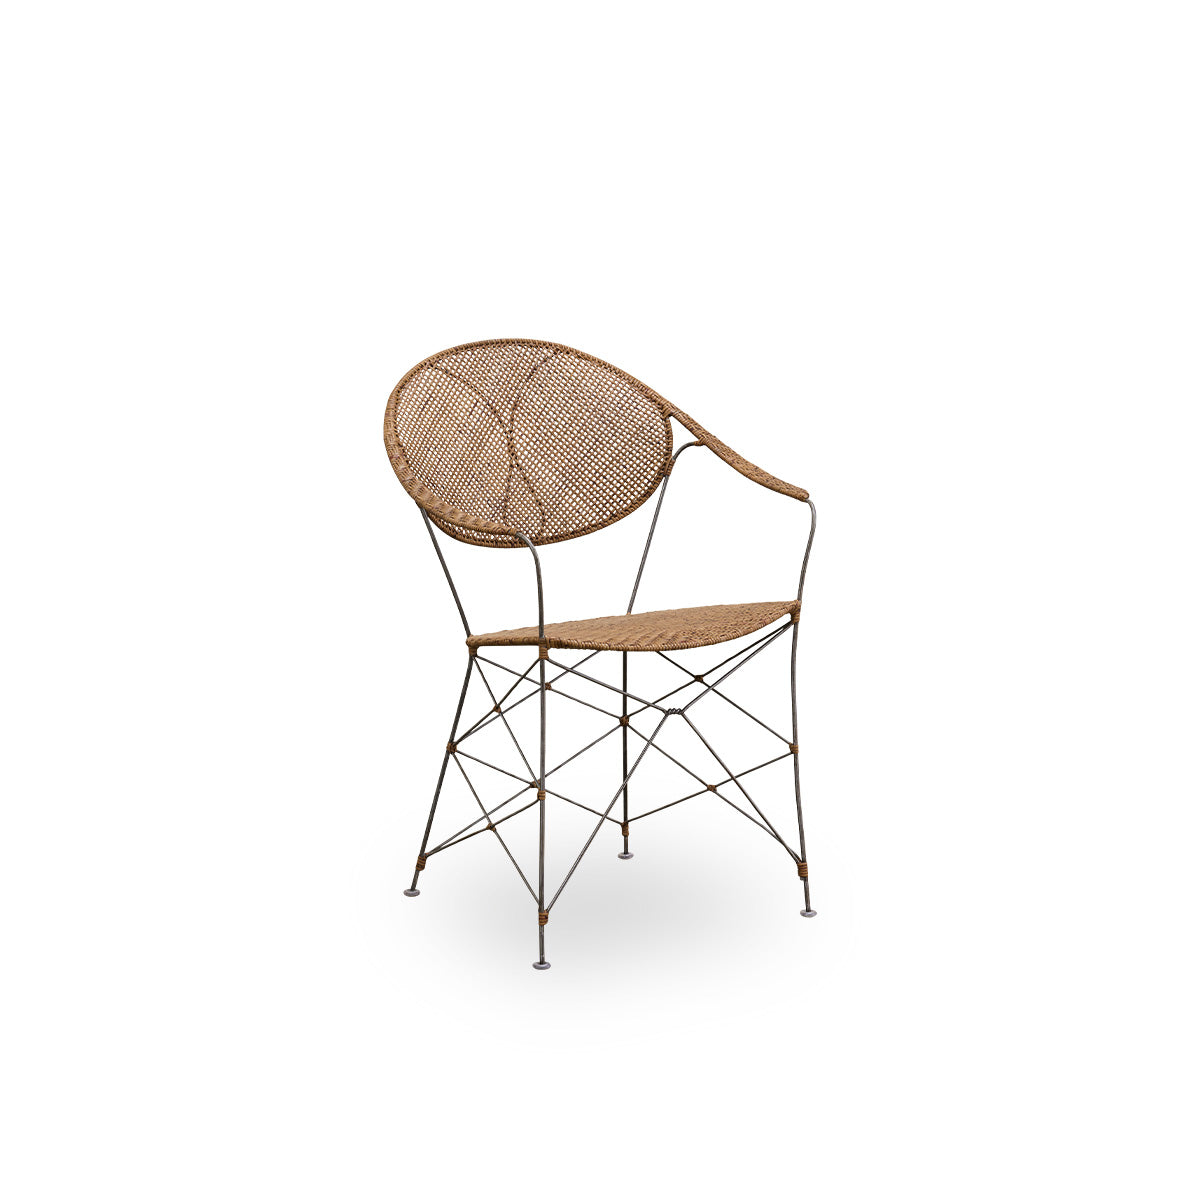 Funky Dining Chair by Sika